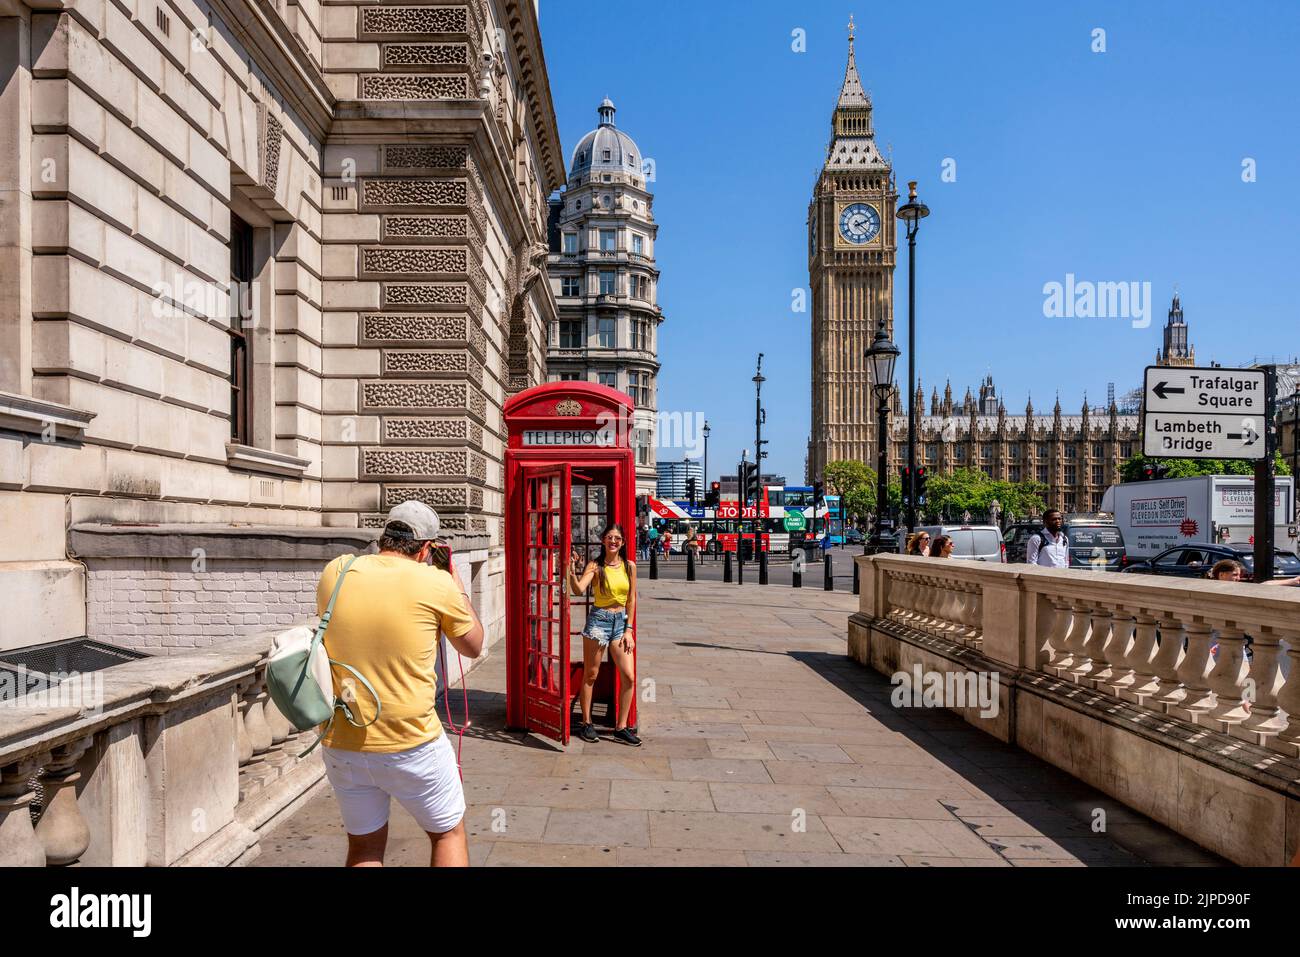 Tourists Pose For Photos Outside A Traditional Red Telephone Box In Parliament Square During A Heatwave, London, UK. Stock Photo